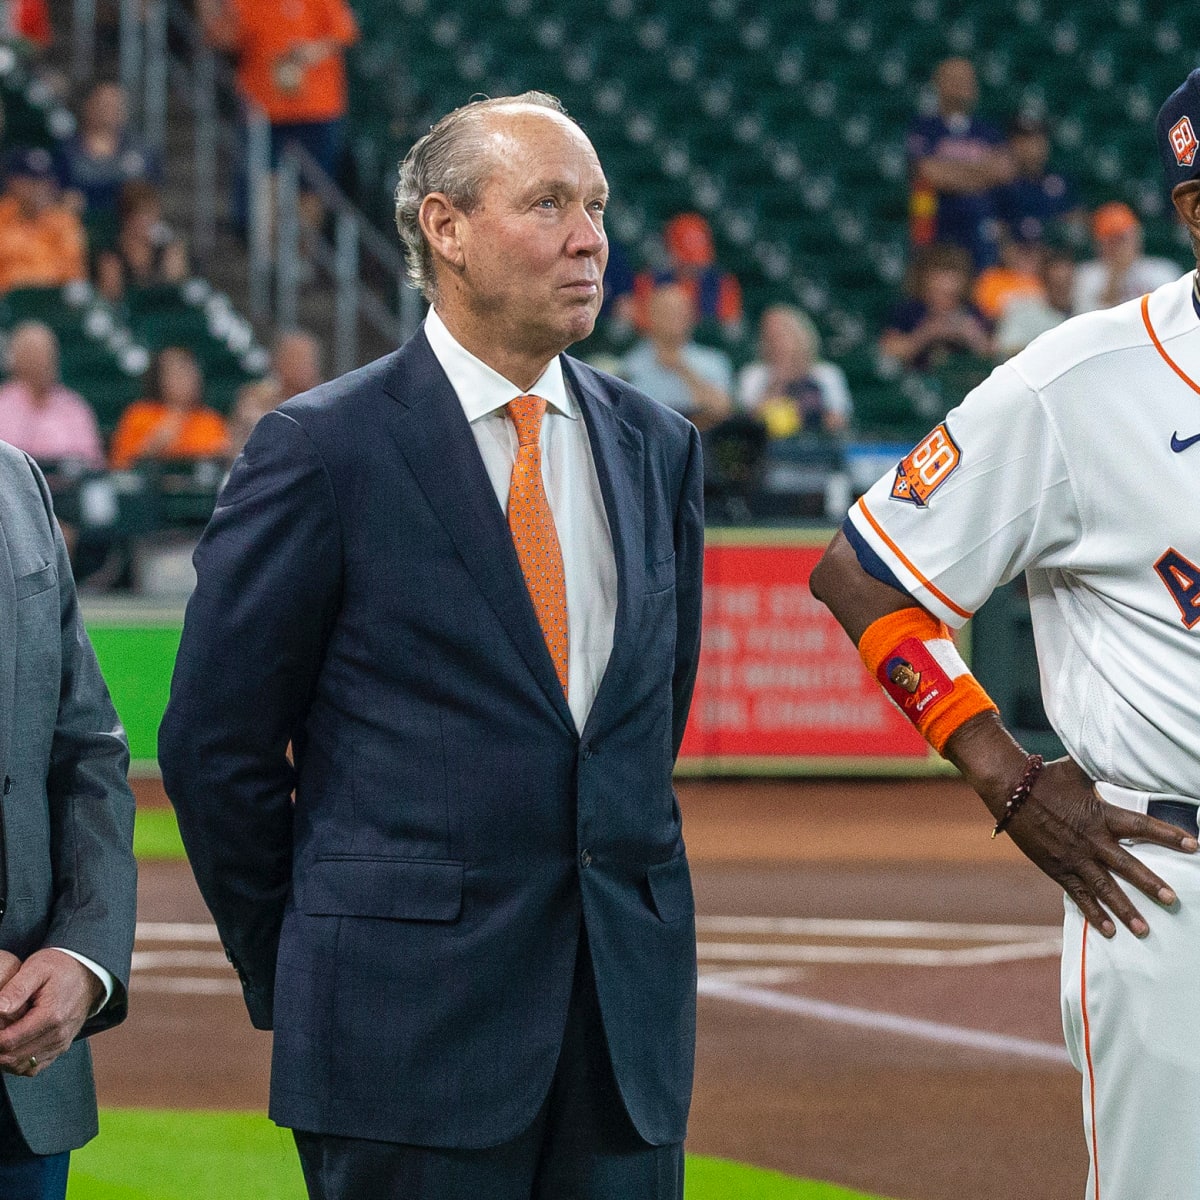 MLB's Worst Team, Houston Astros, Is Reportedly the Sport's Most